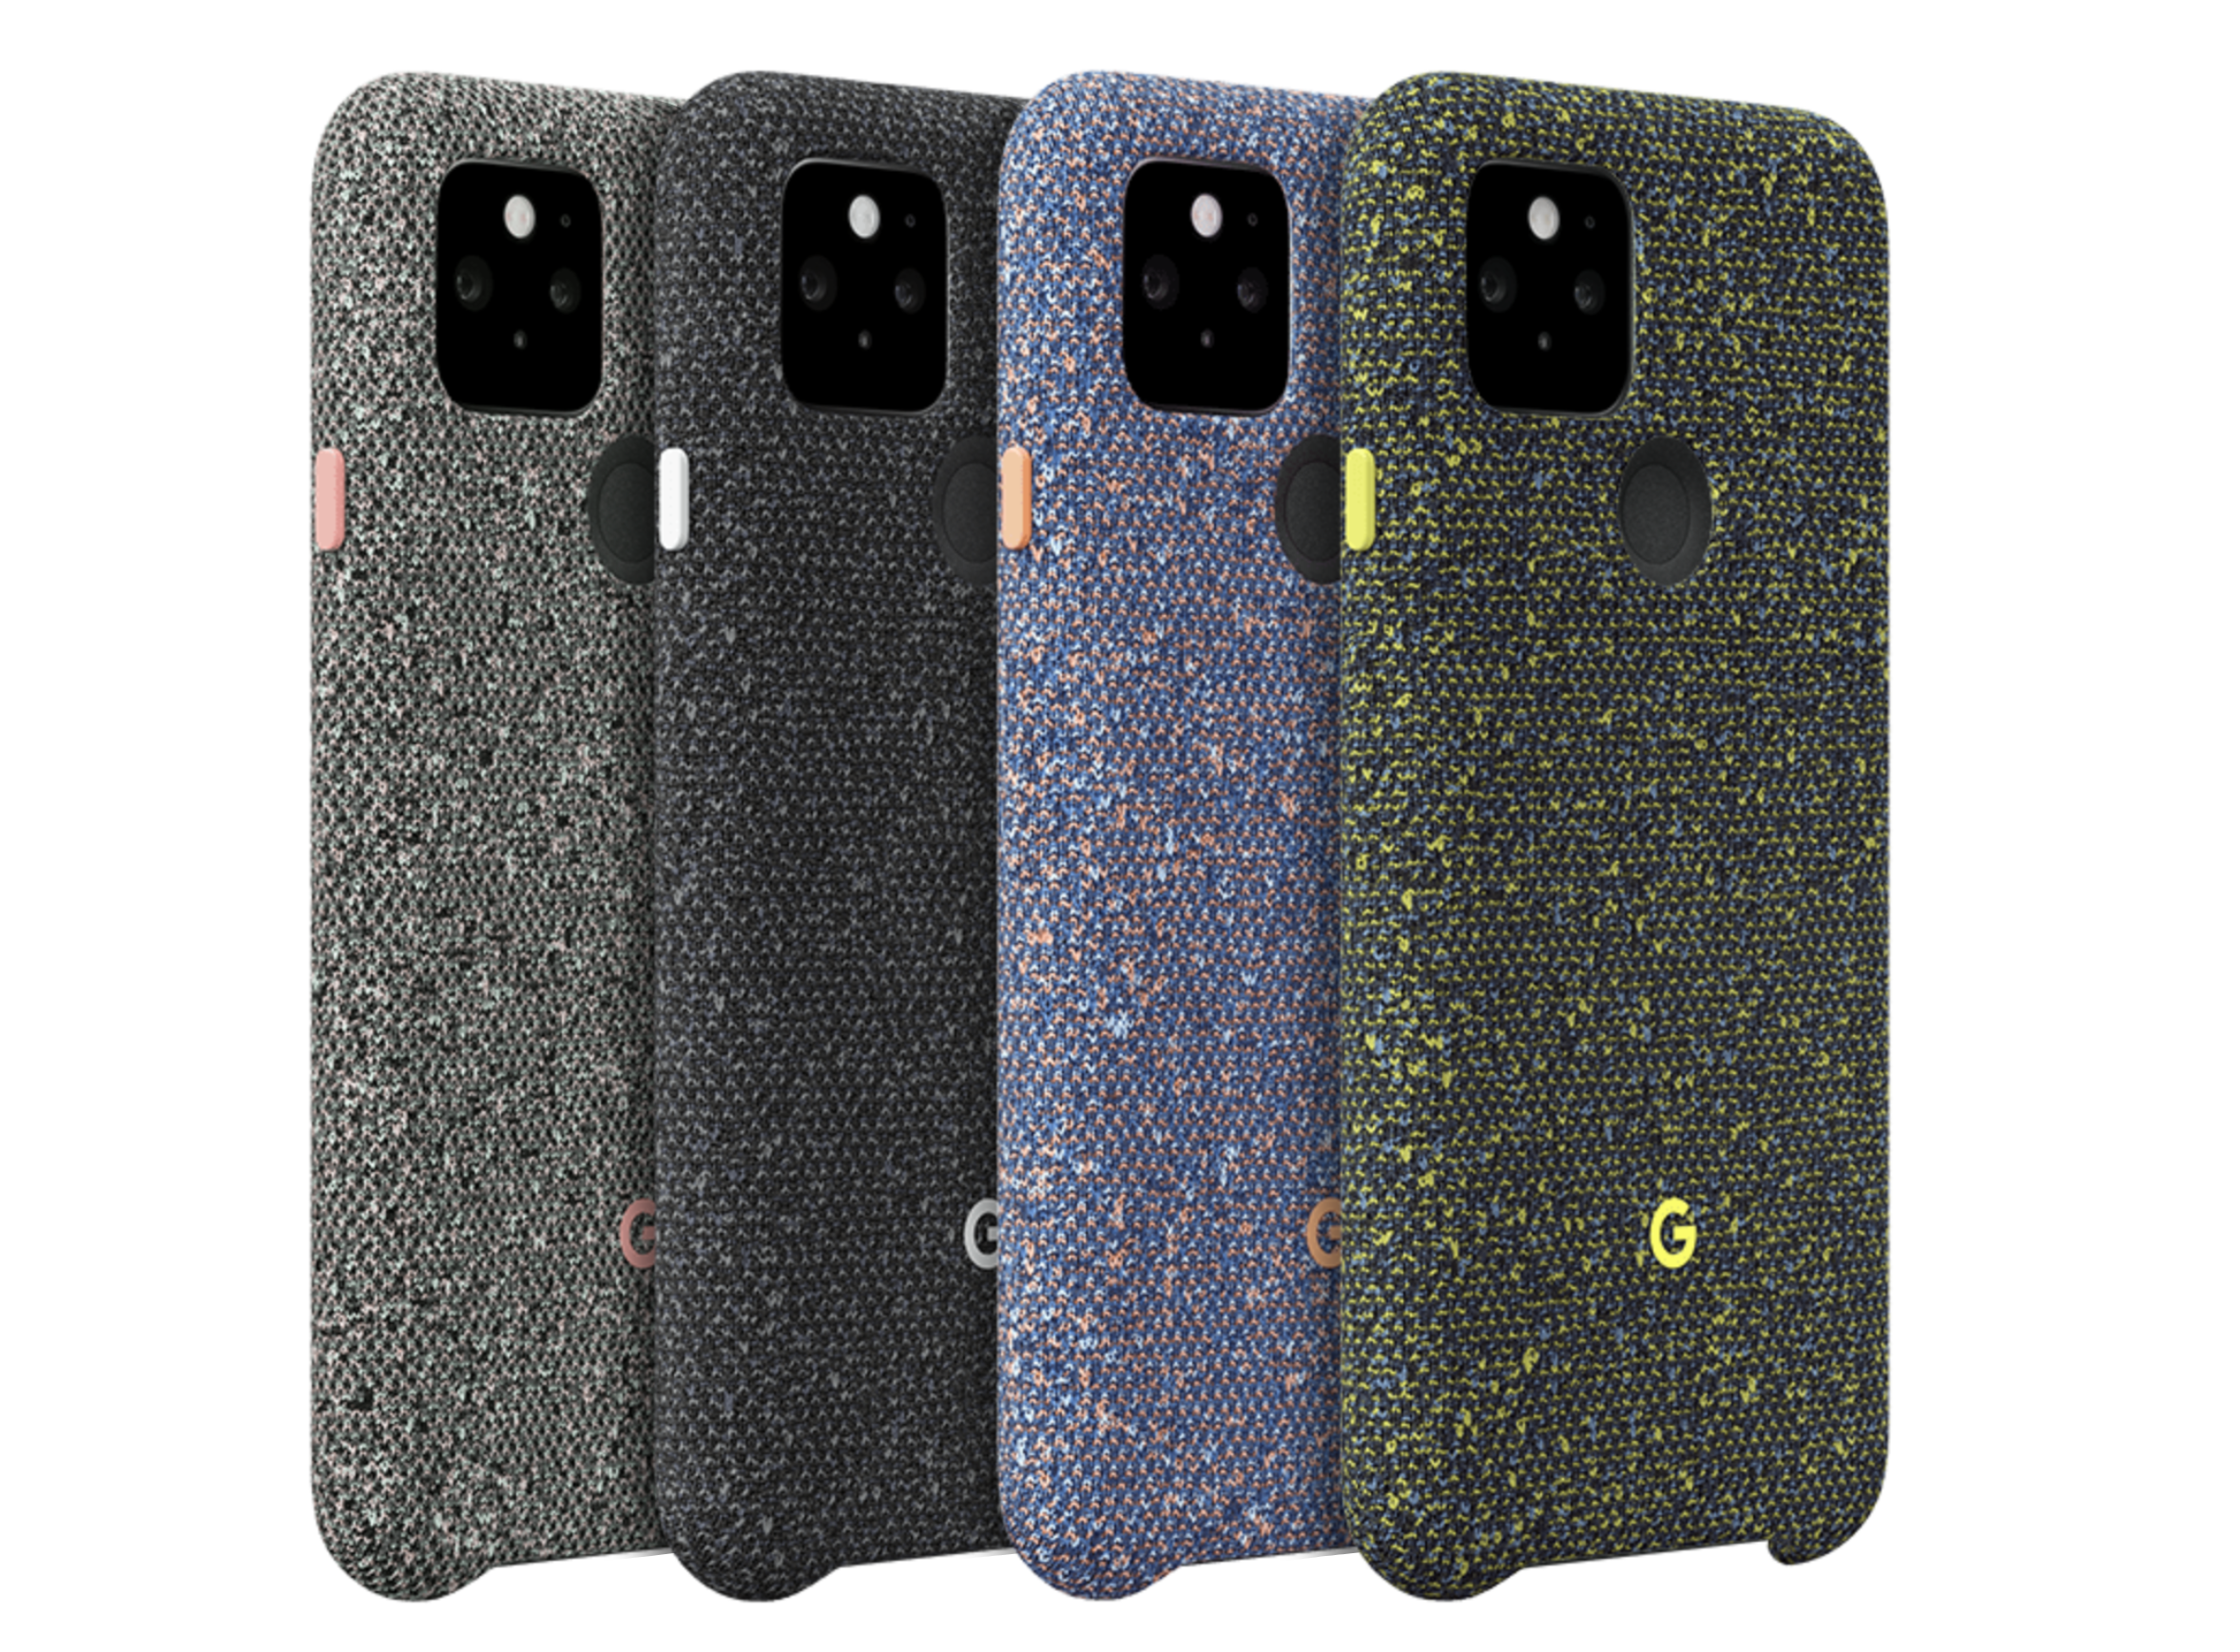 The fabric Pixel 5 case by Google